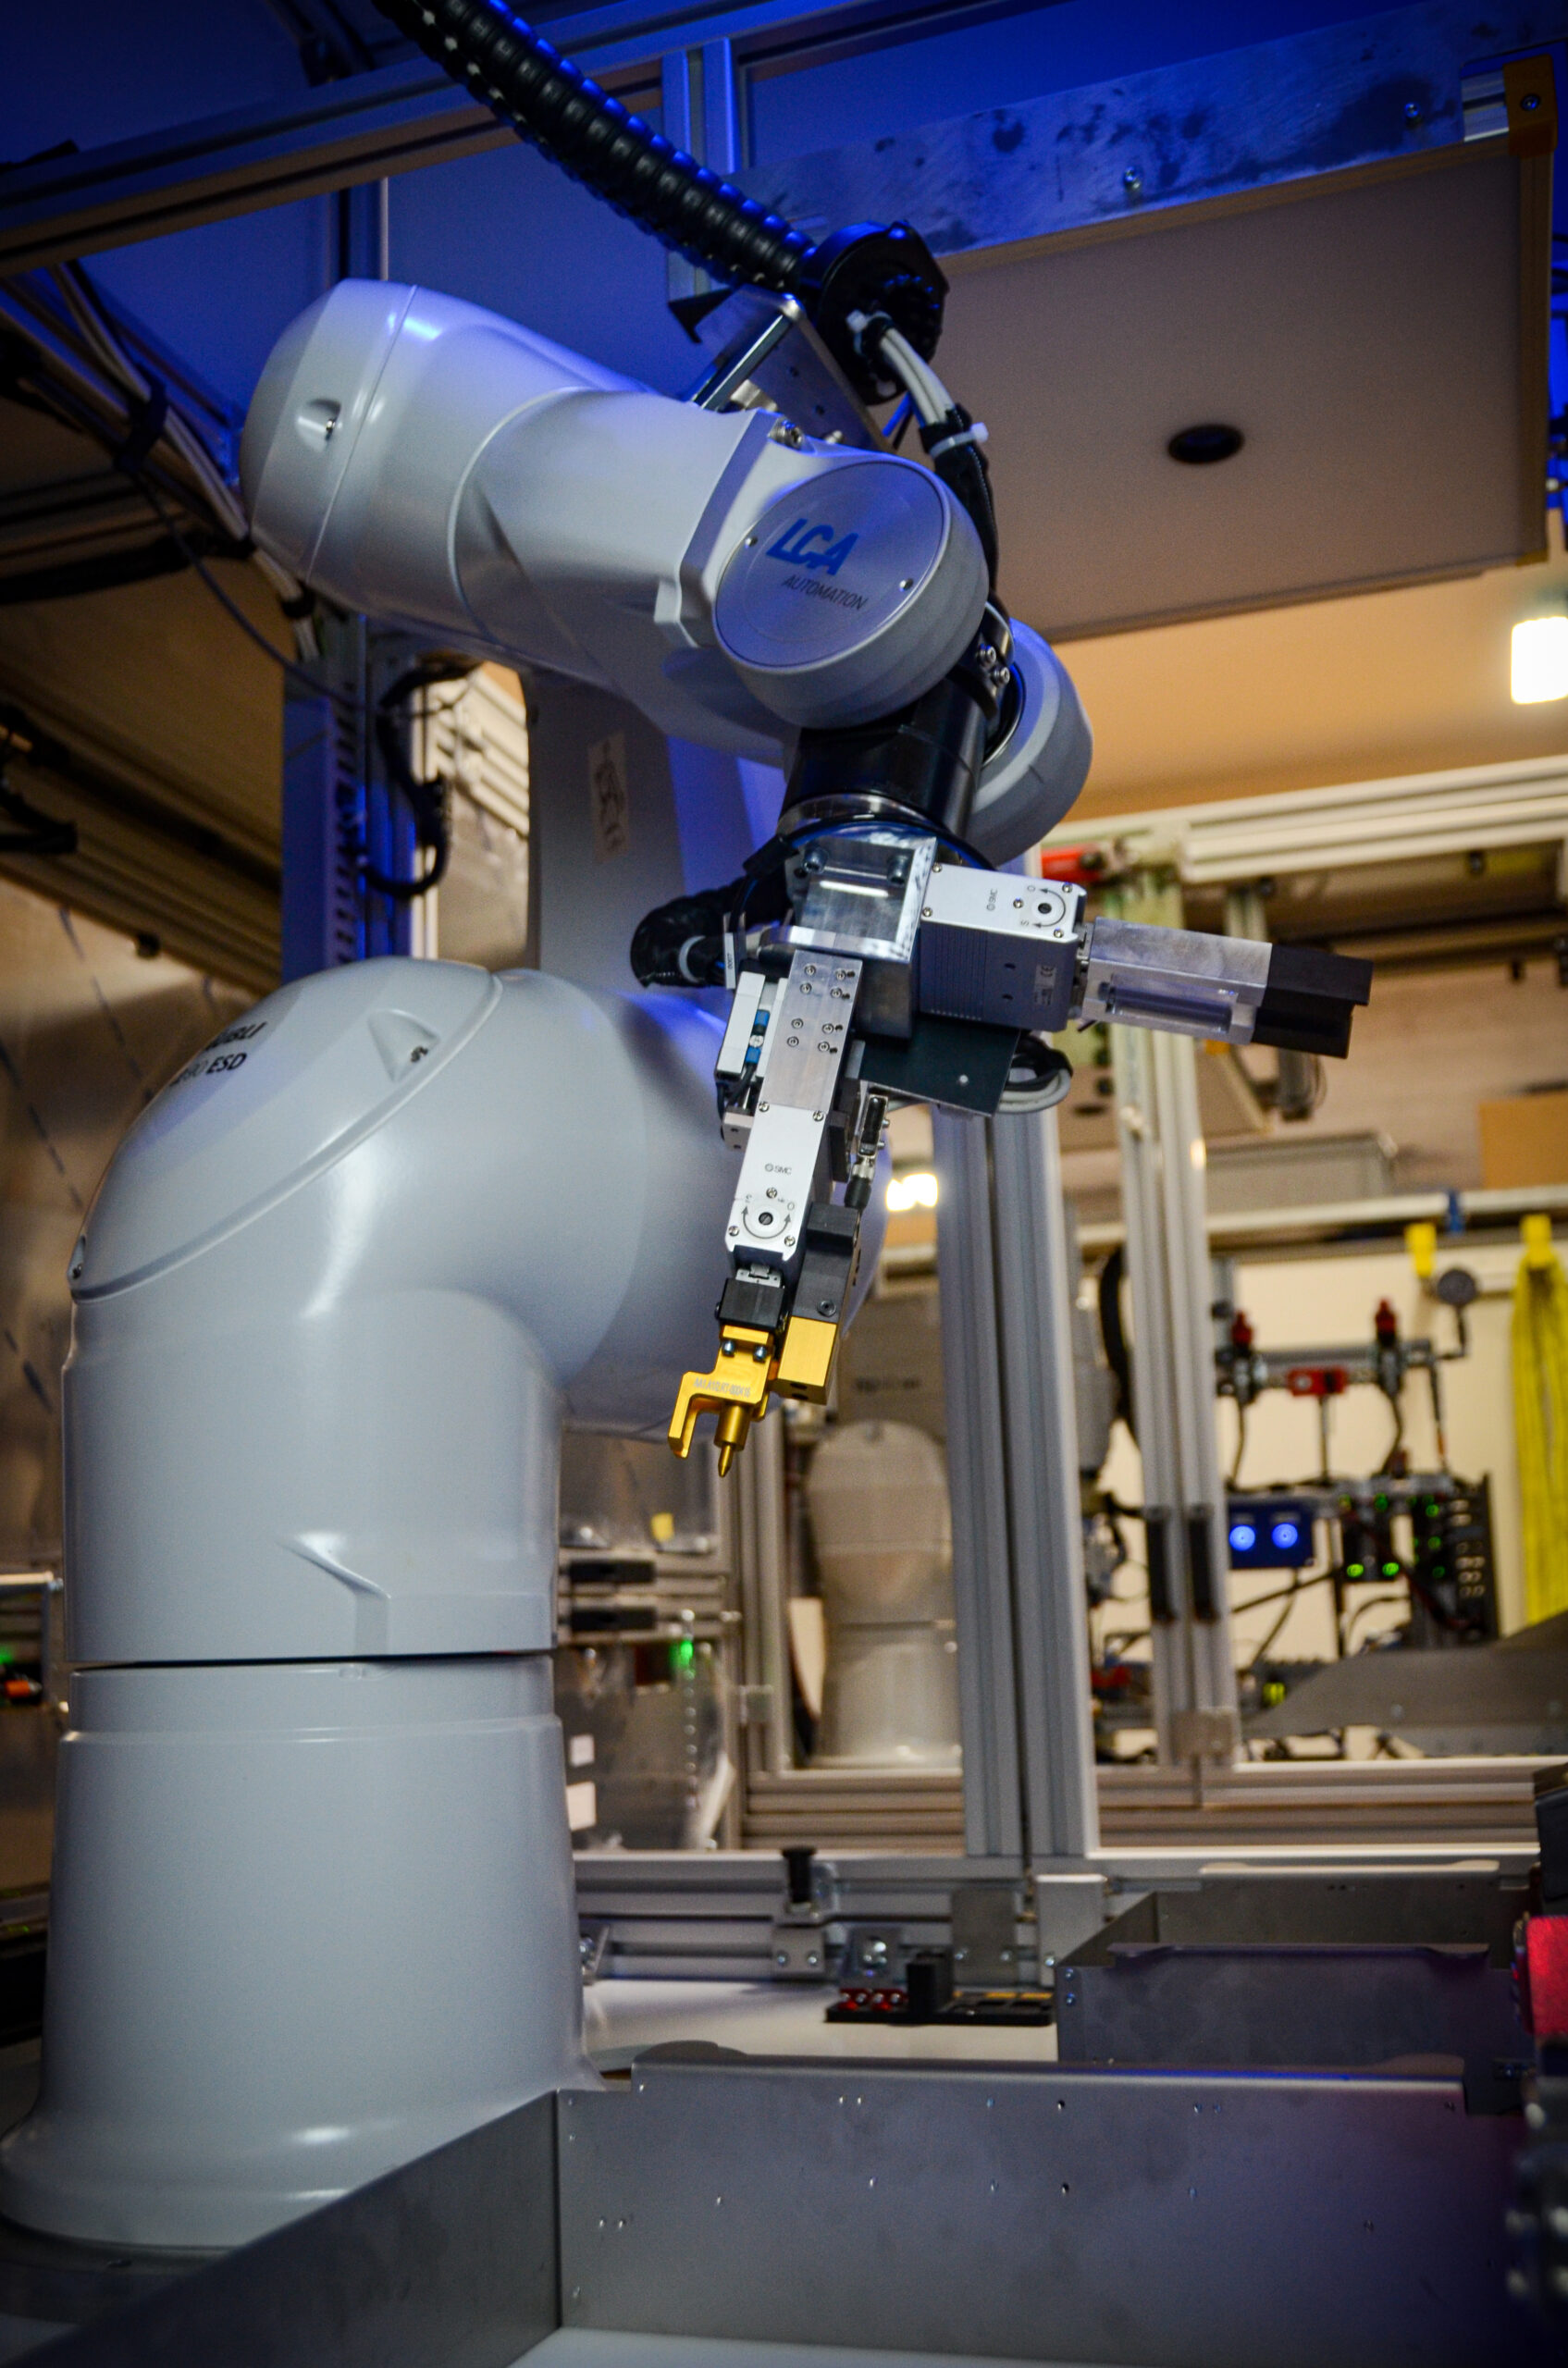 We know, robotic arms look spectacular. But not every machine needs one. We love to implement them, when necessary.